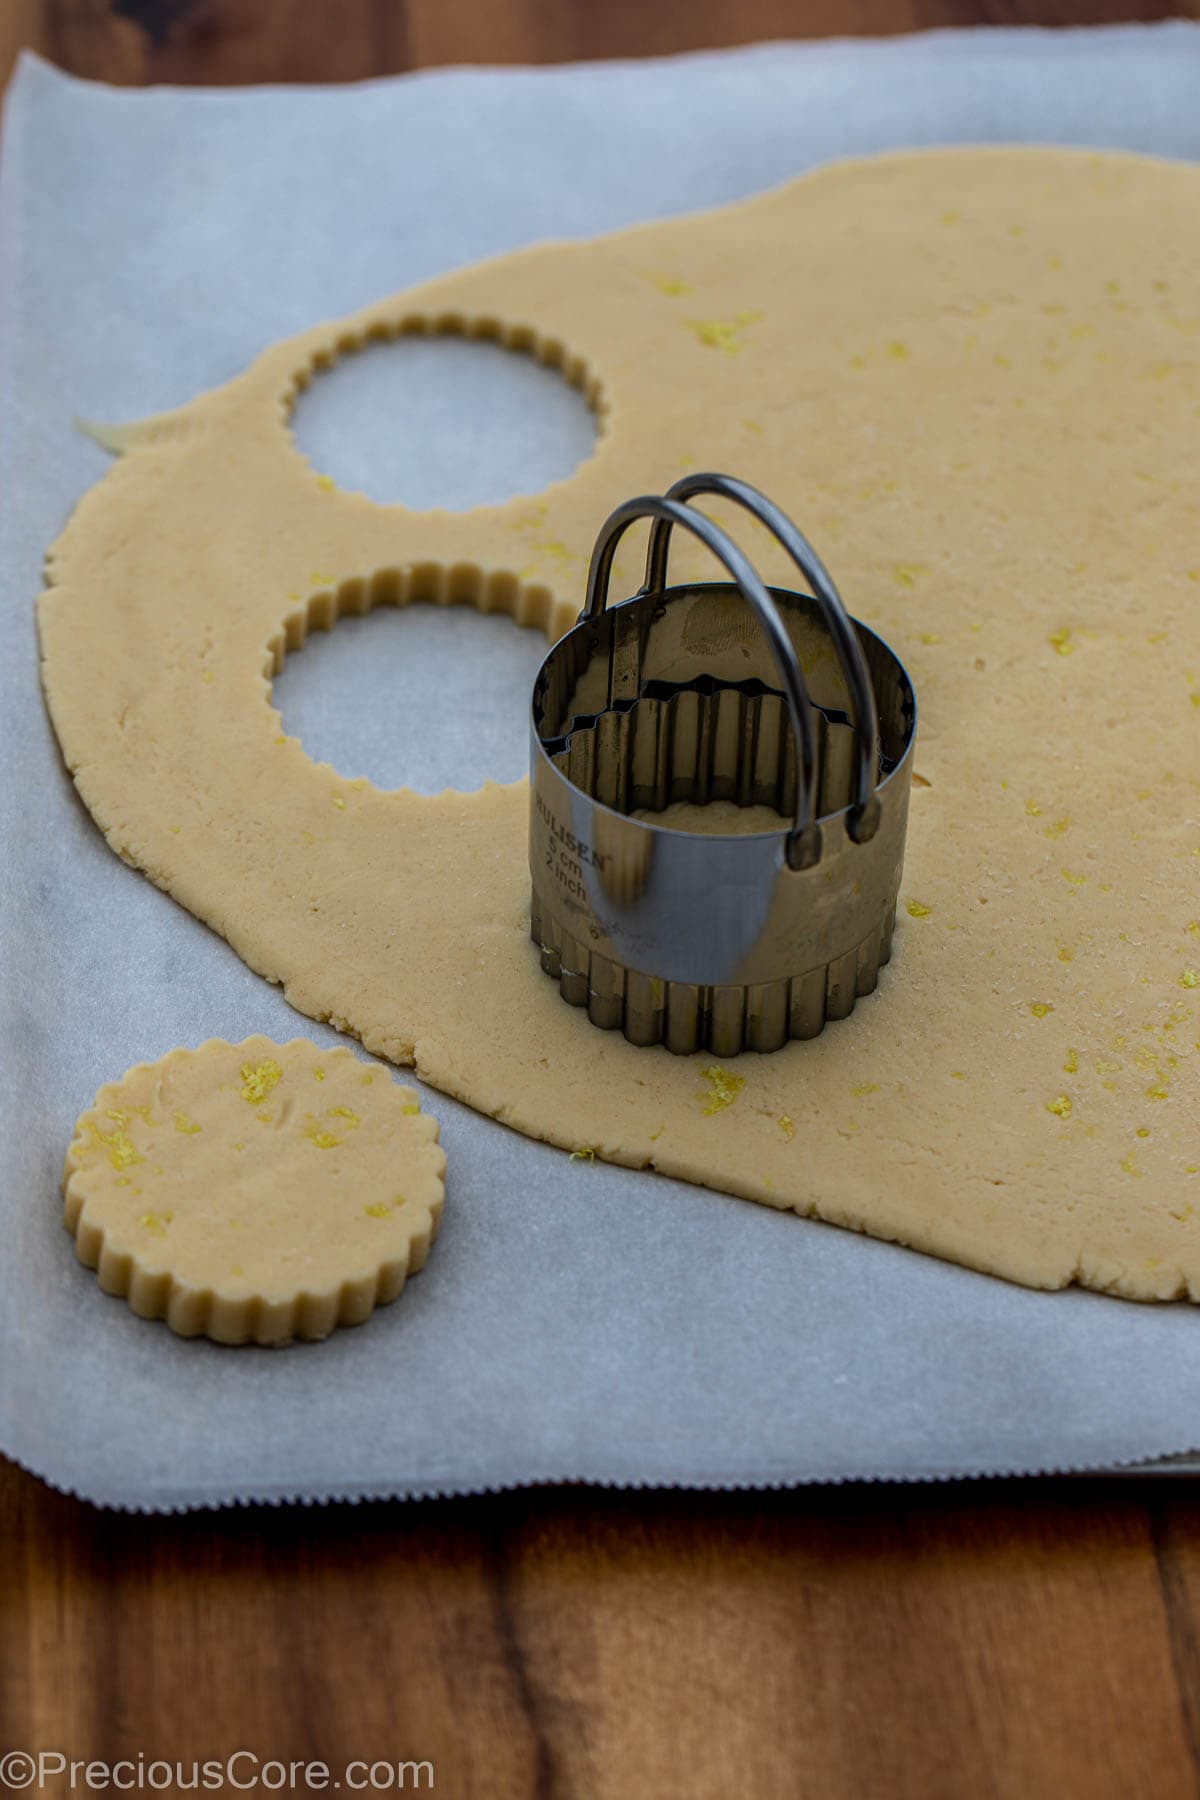 2 inch cookie cutter on dough for cutting out 2-inch circle cookies.